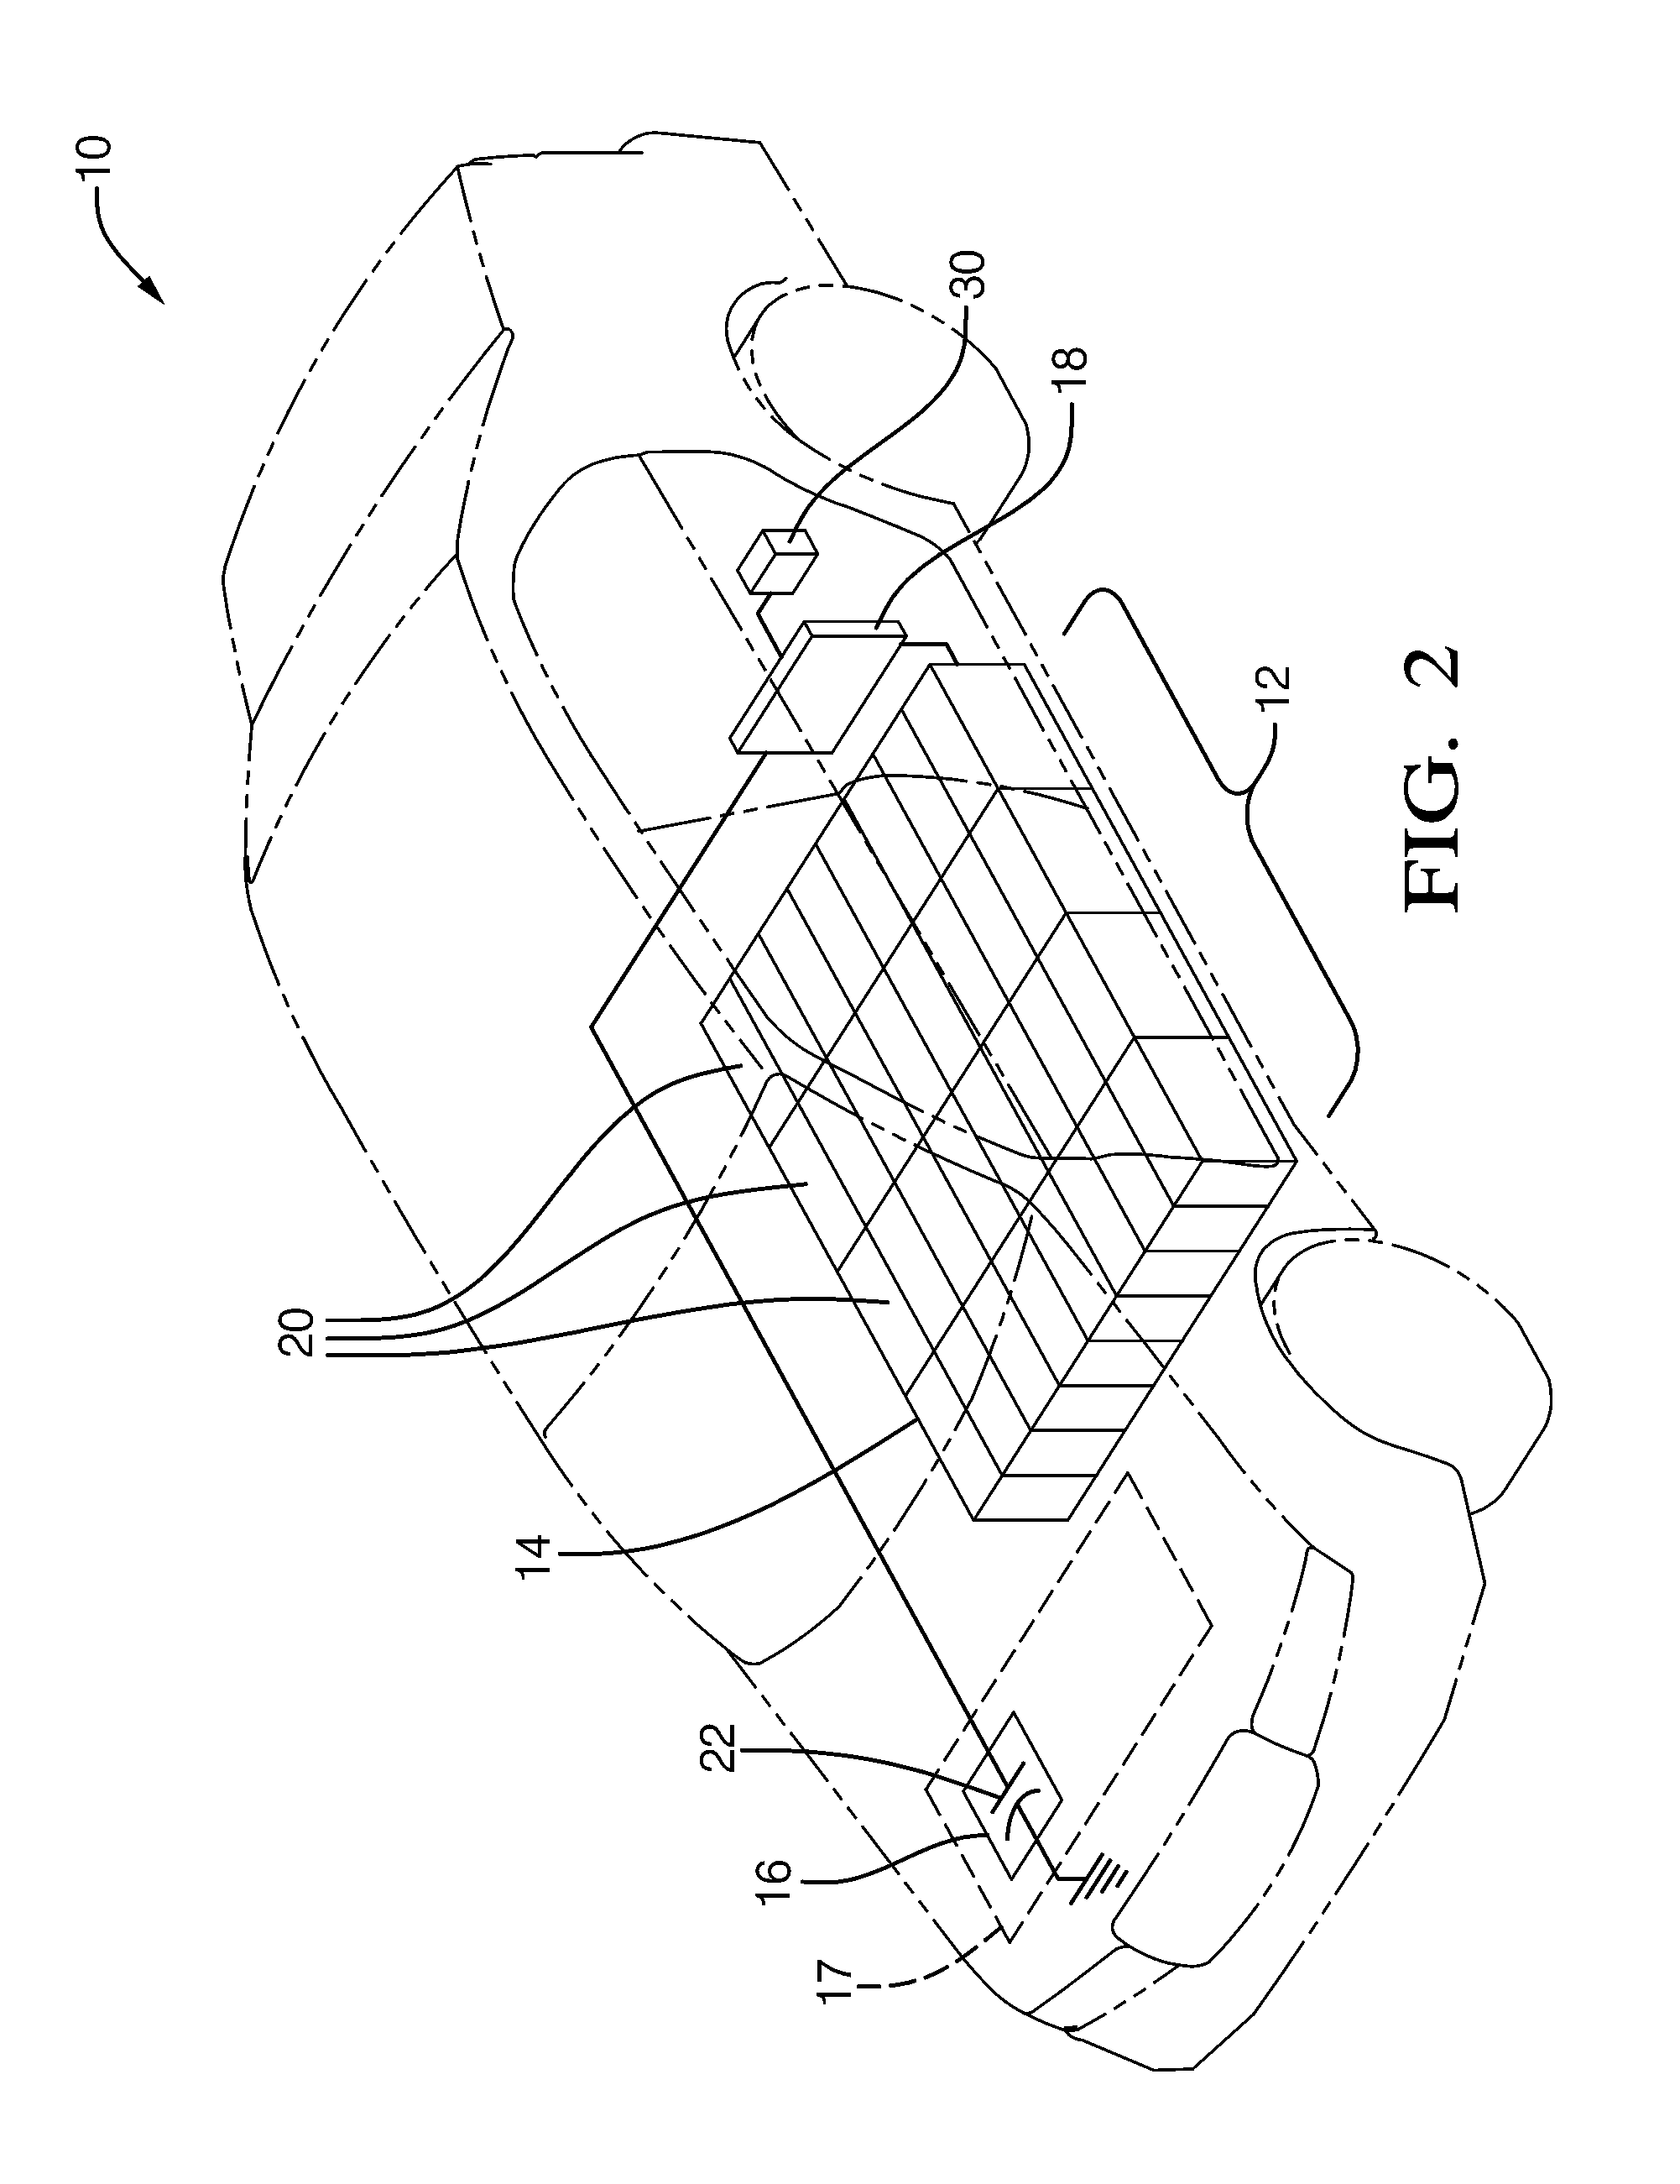 Power charging assembly and method that includes a low voltage electrical device operable with pulse width modulation (PWM) control